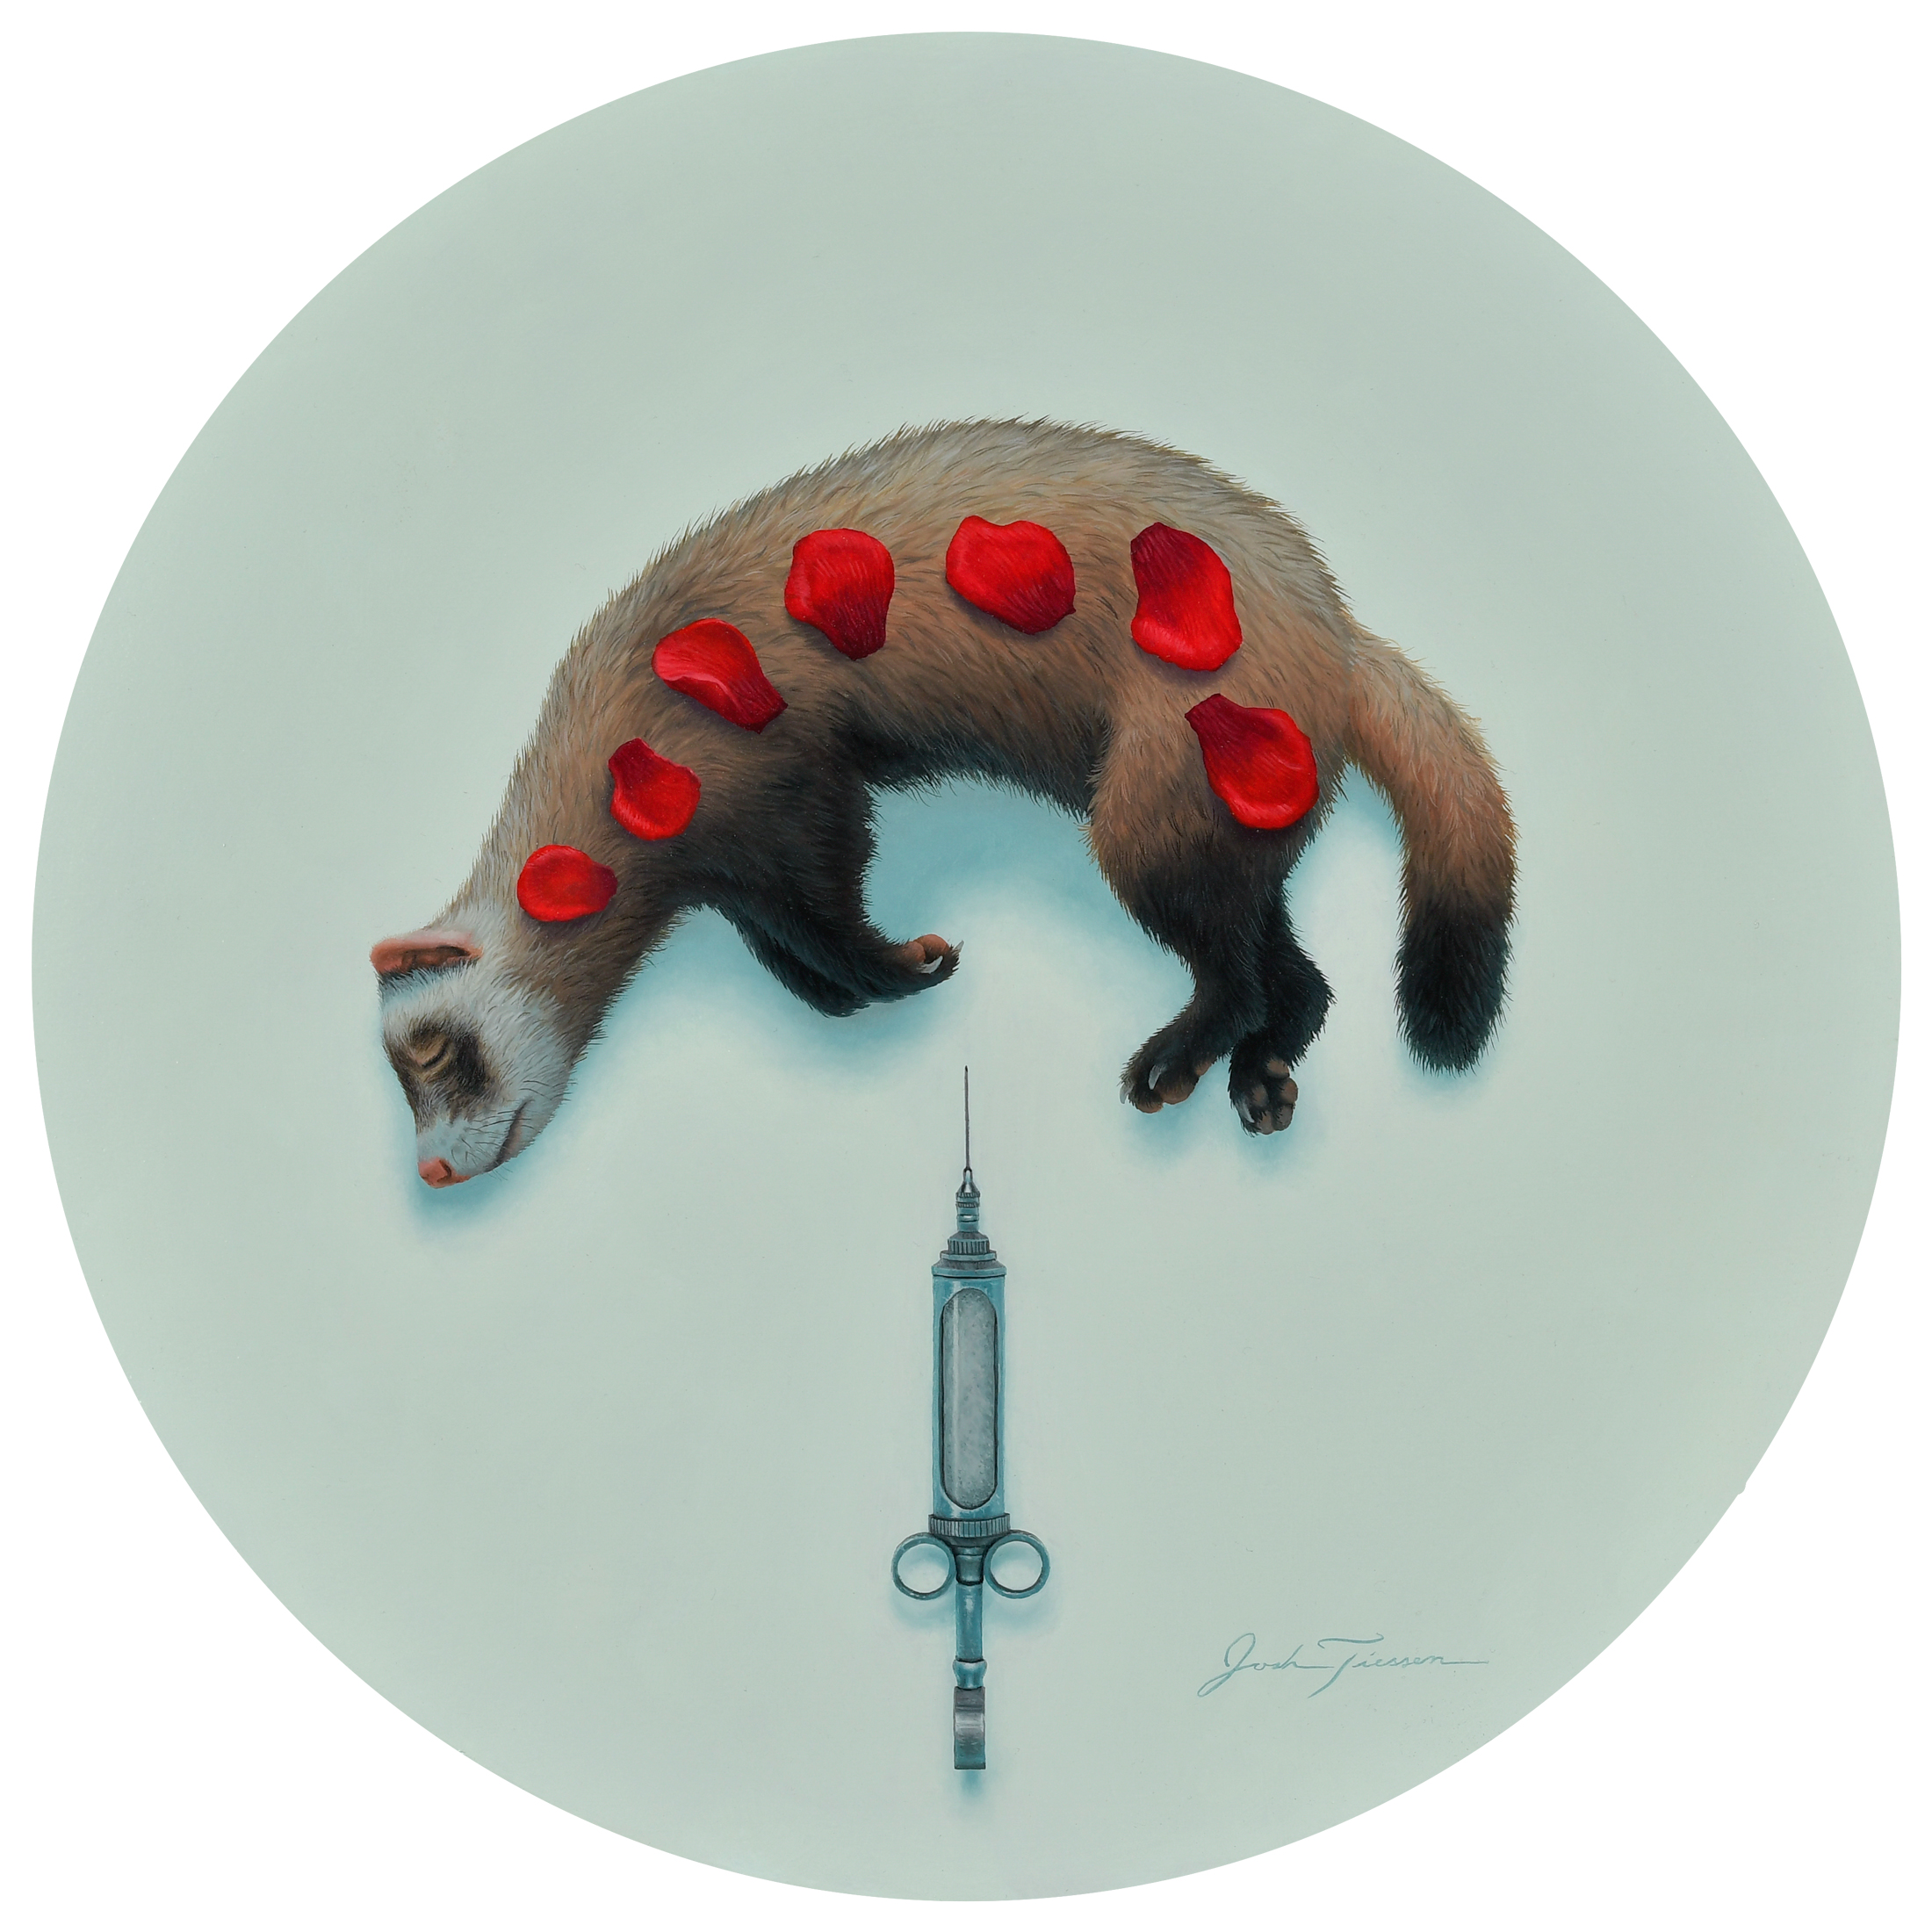 The Ferret Trials <br/> Oil on Birch <br/>12 x 12 inches <br/>Framed: 16 x 16 inches <br/>
$4,000
